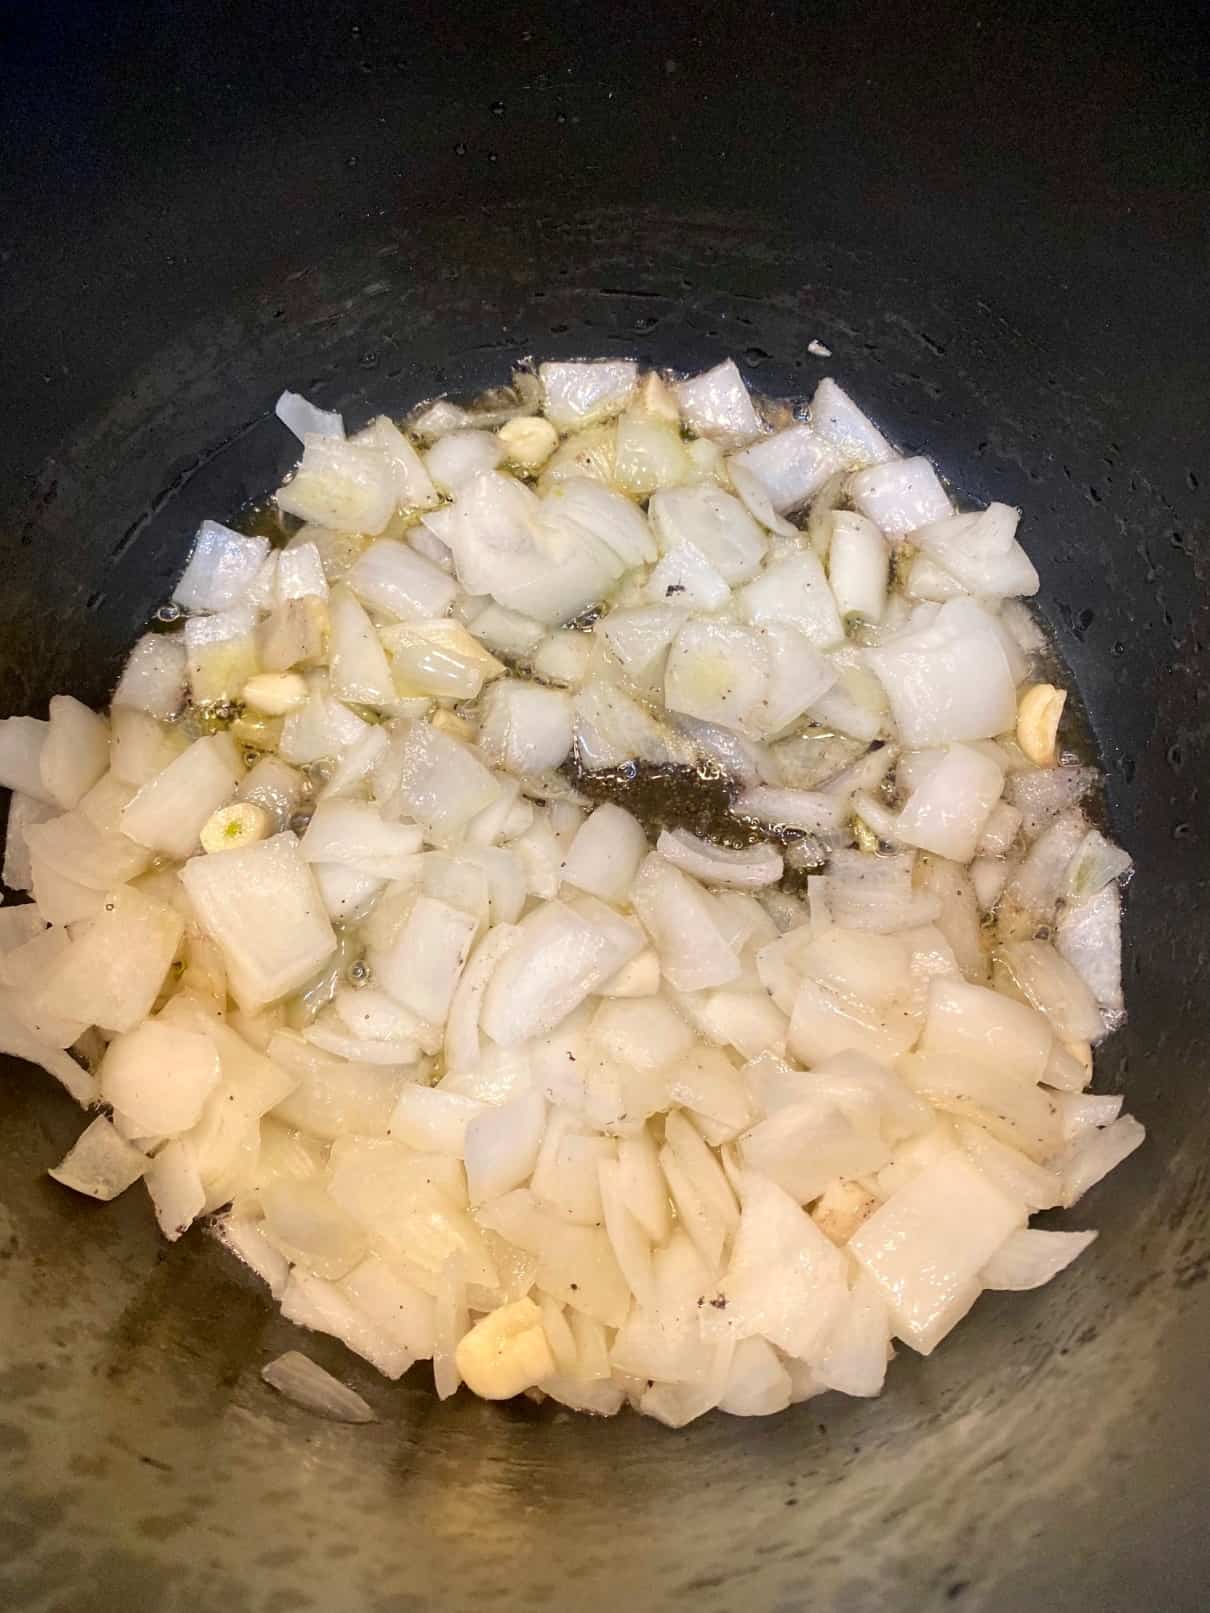 Sauteing chopped white onions and garlic in olive oil.